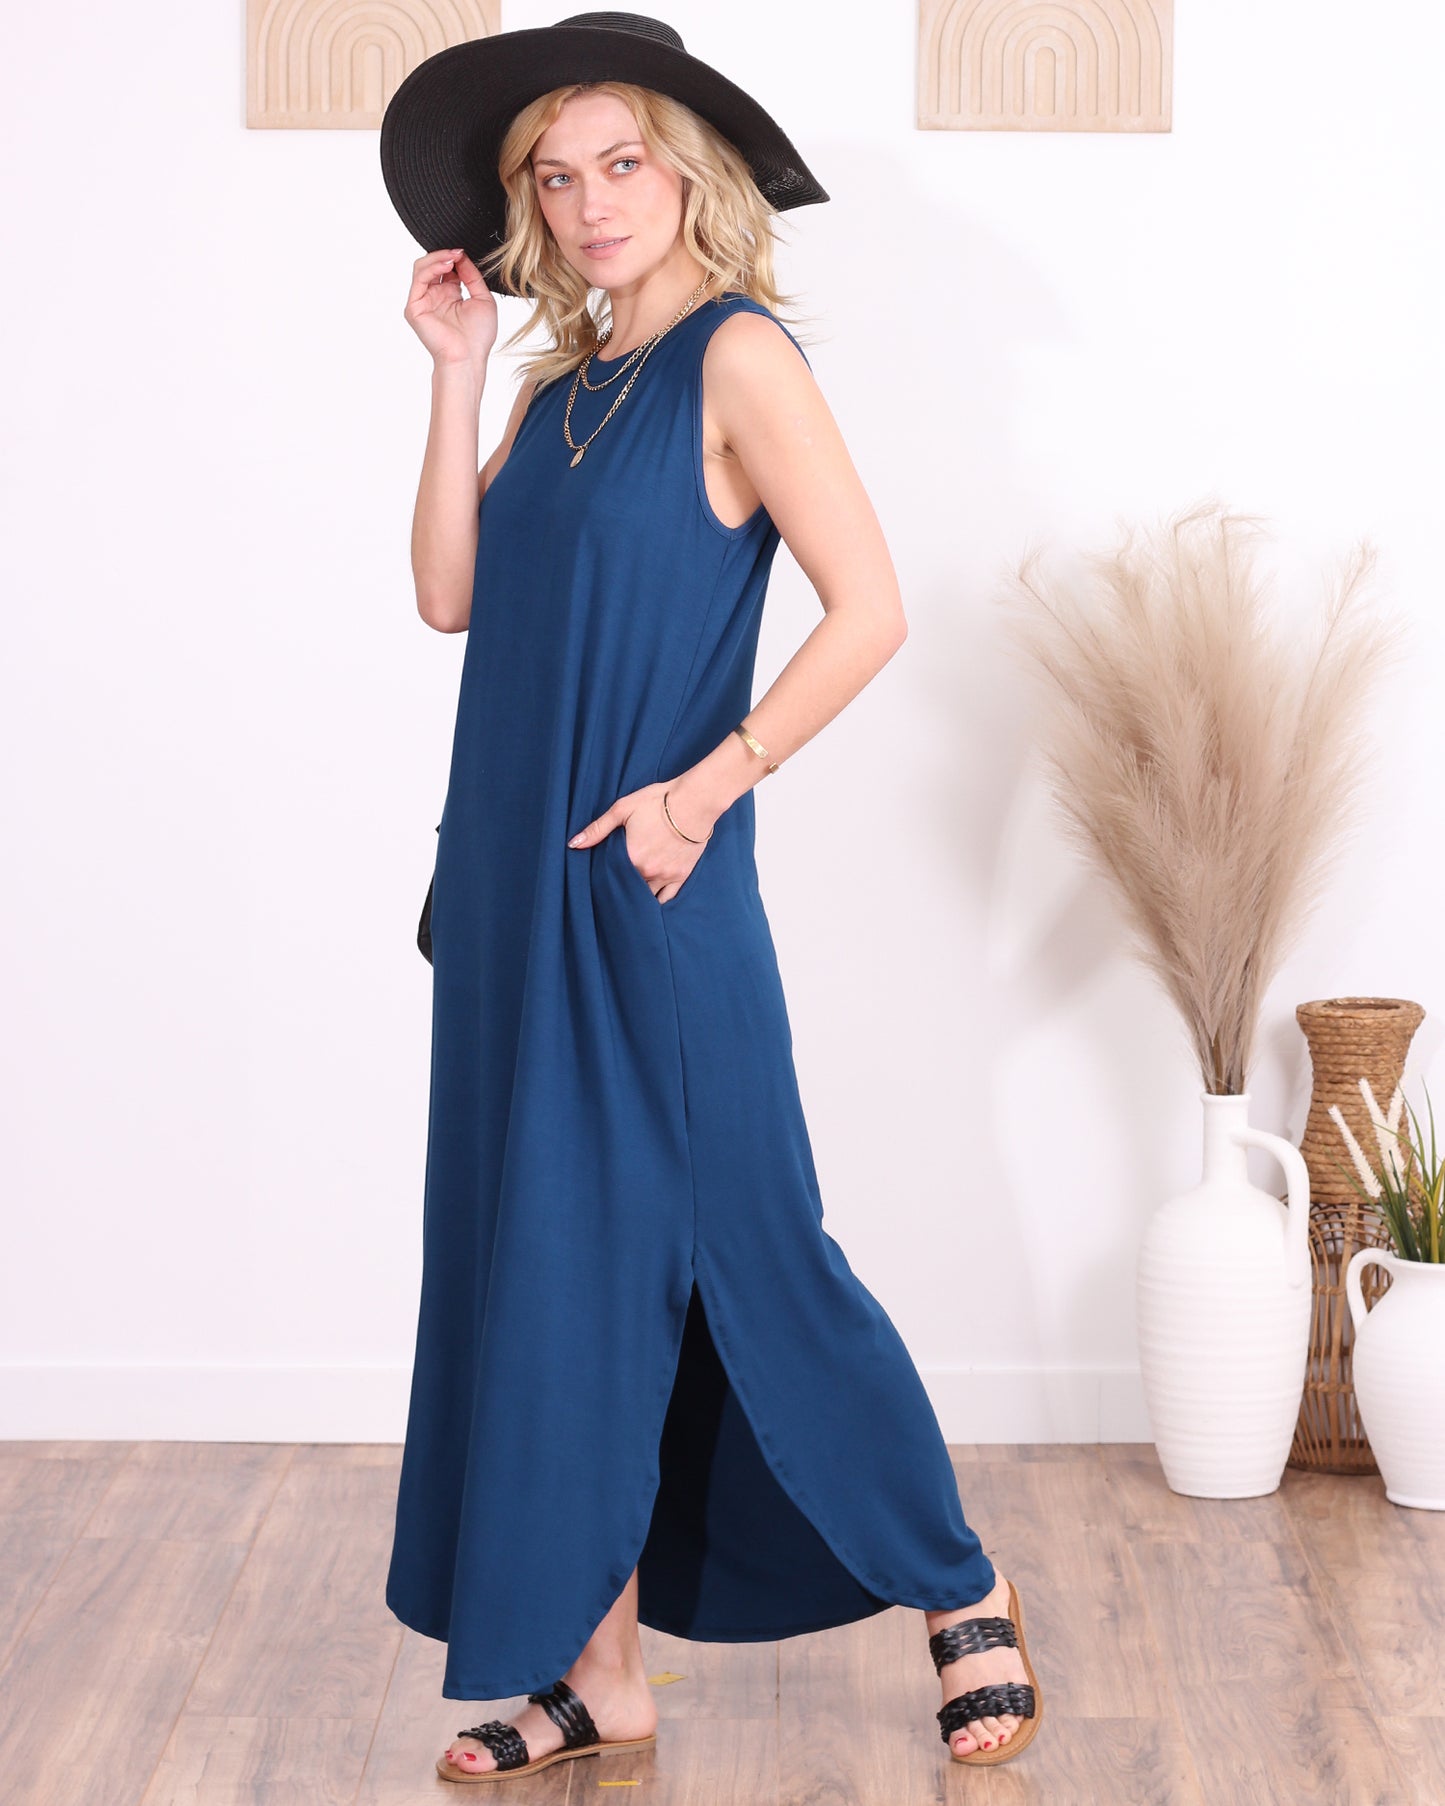 Teal Casual Sleeveless Maxi Dress with Pockets